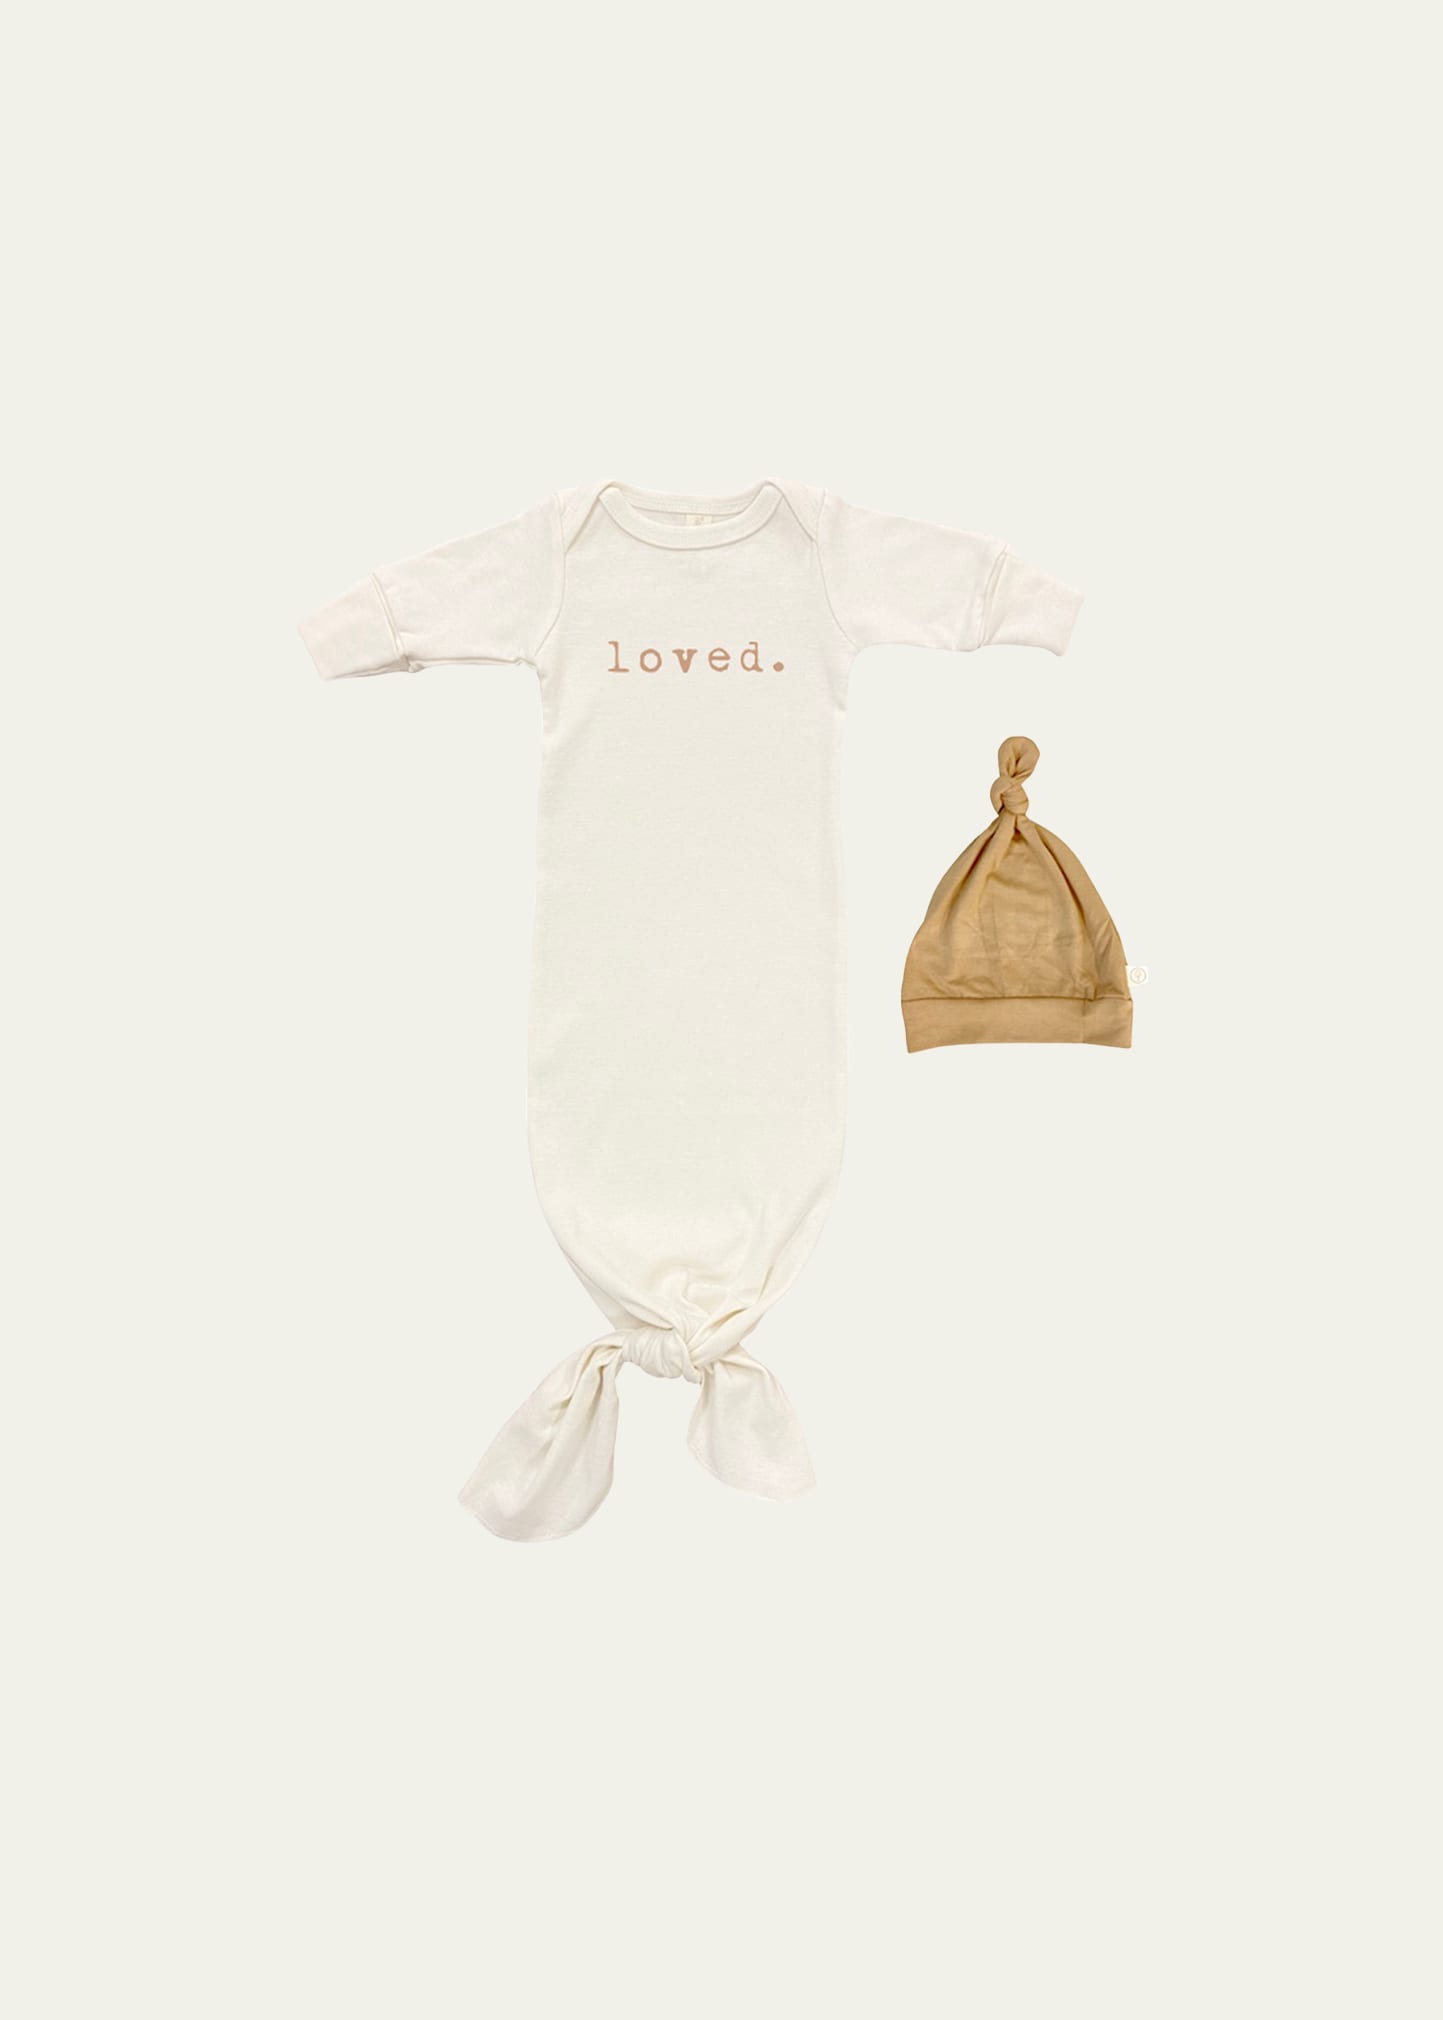 Tenth & Pine Babies' Kid's Loved Knotted Gown W/ Hat In Natural 3